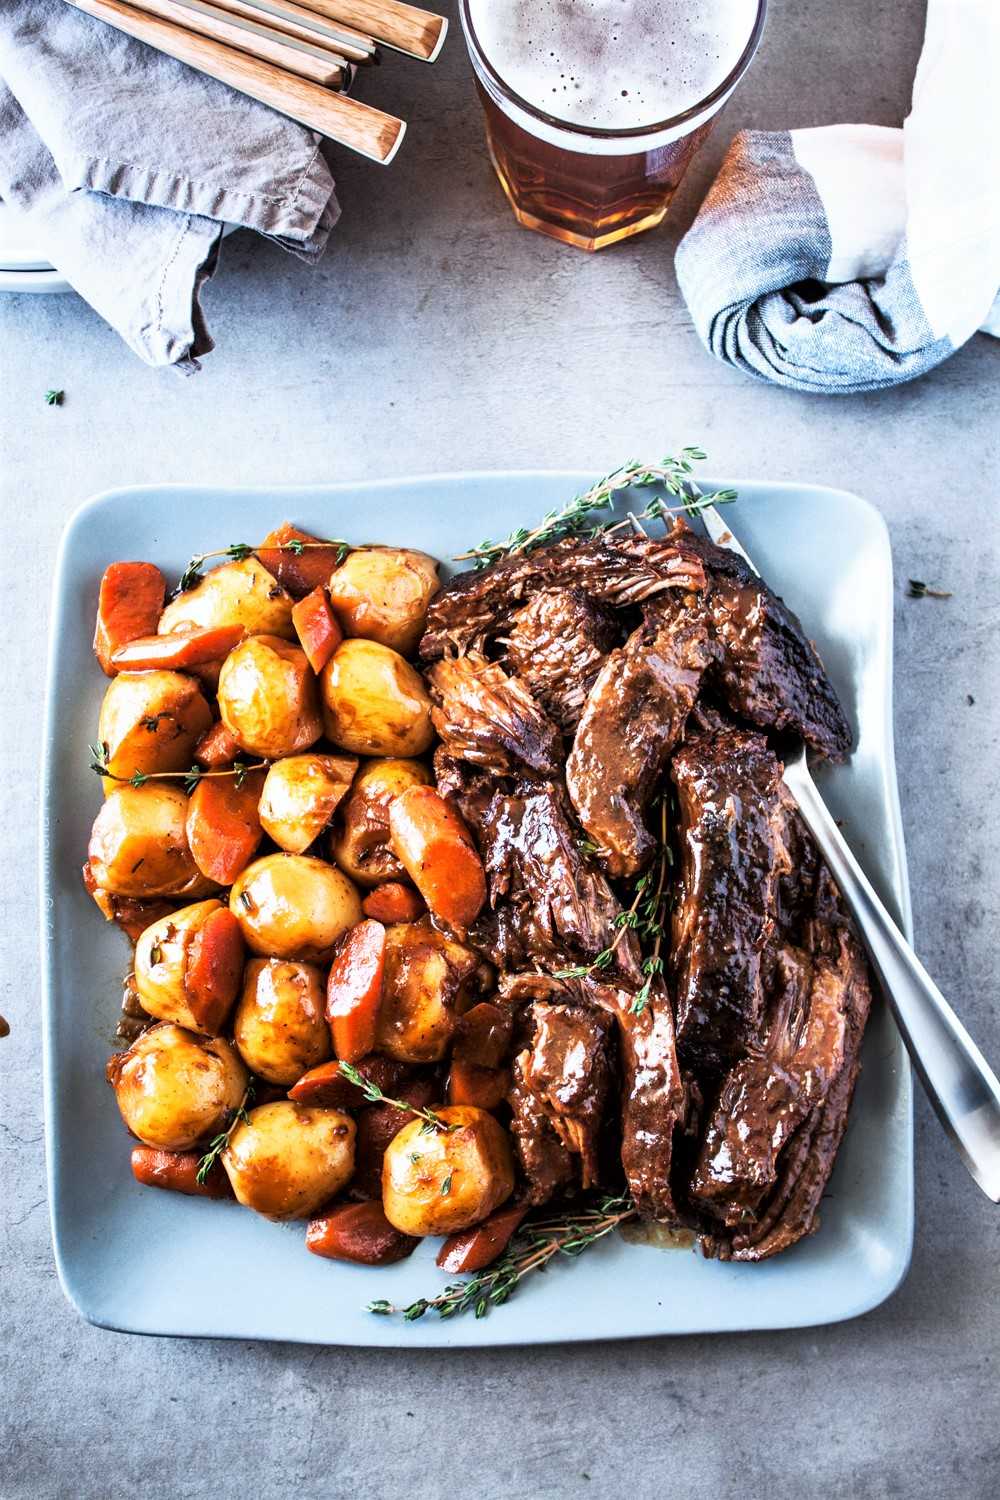 Beer braised pot roast plated with potatoes and carrots.